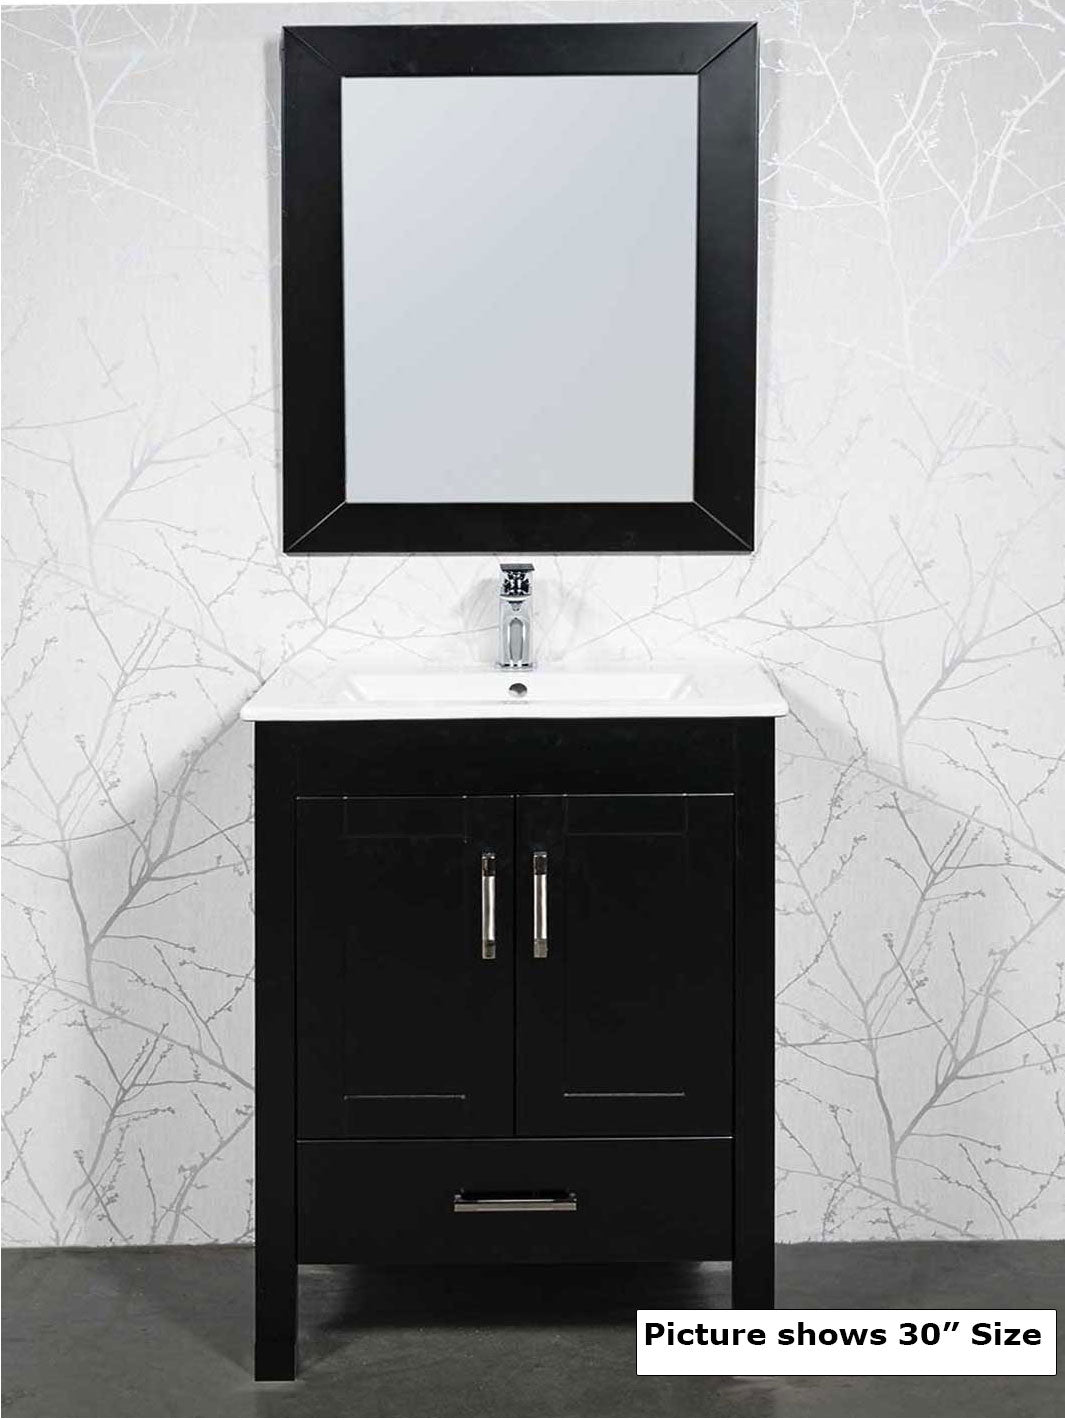 black vanity with black framed mirror, white ceramic sink, and chrome faucet